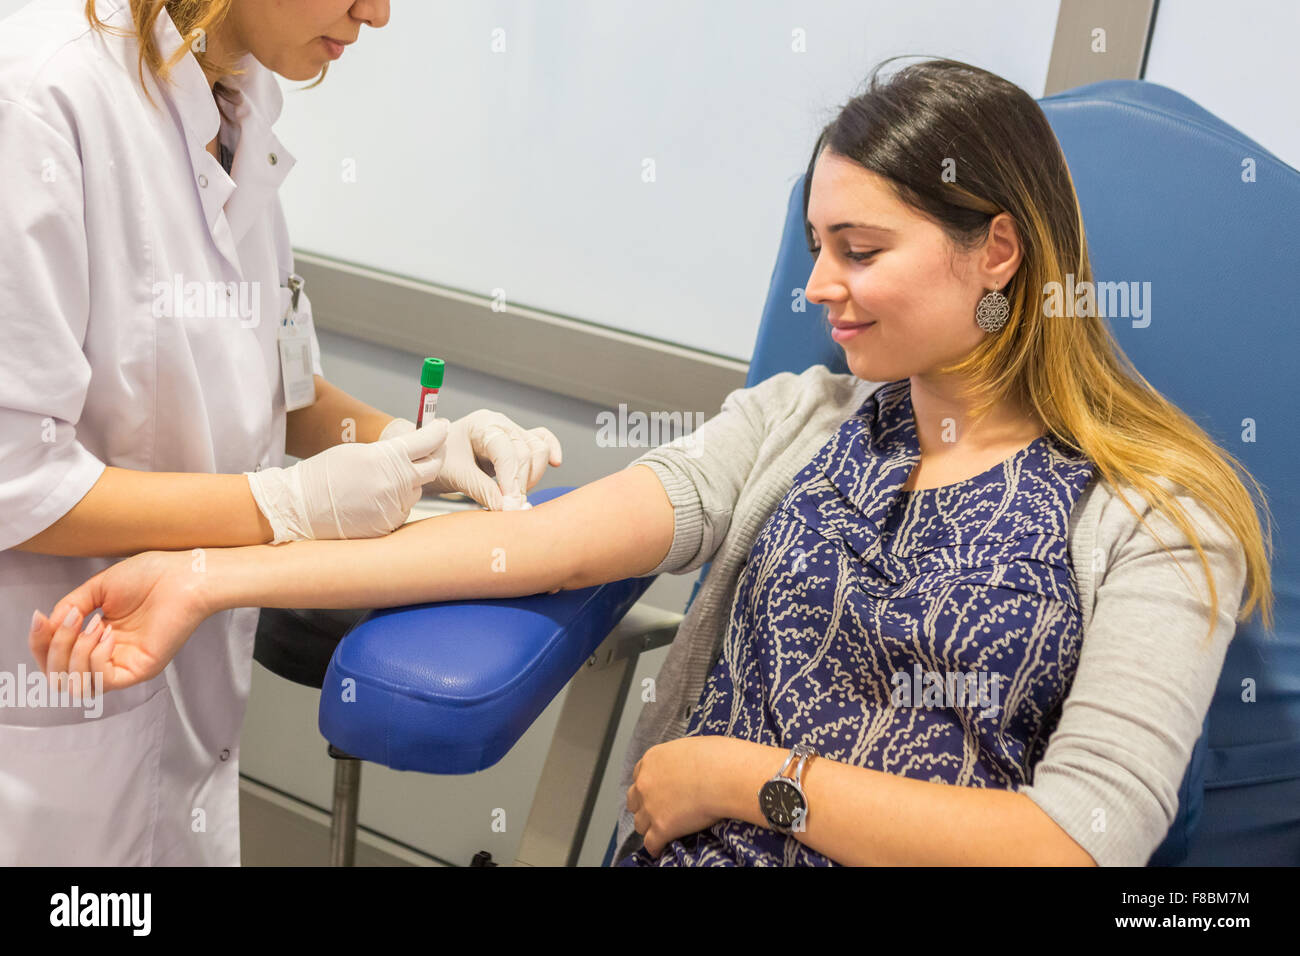 Young woman having a blood sample. Stock Photo